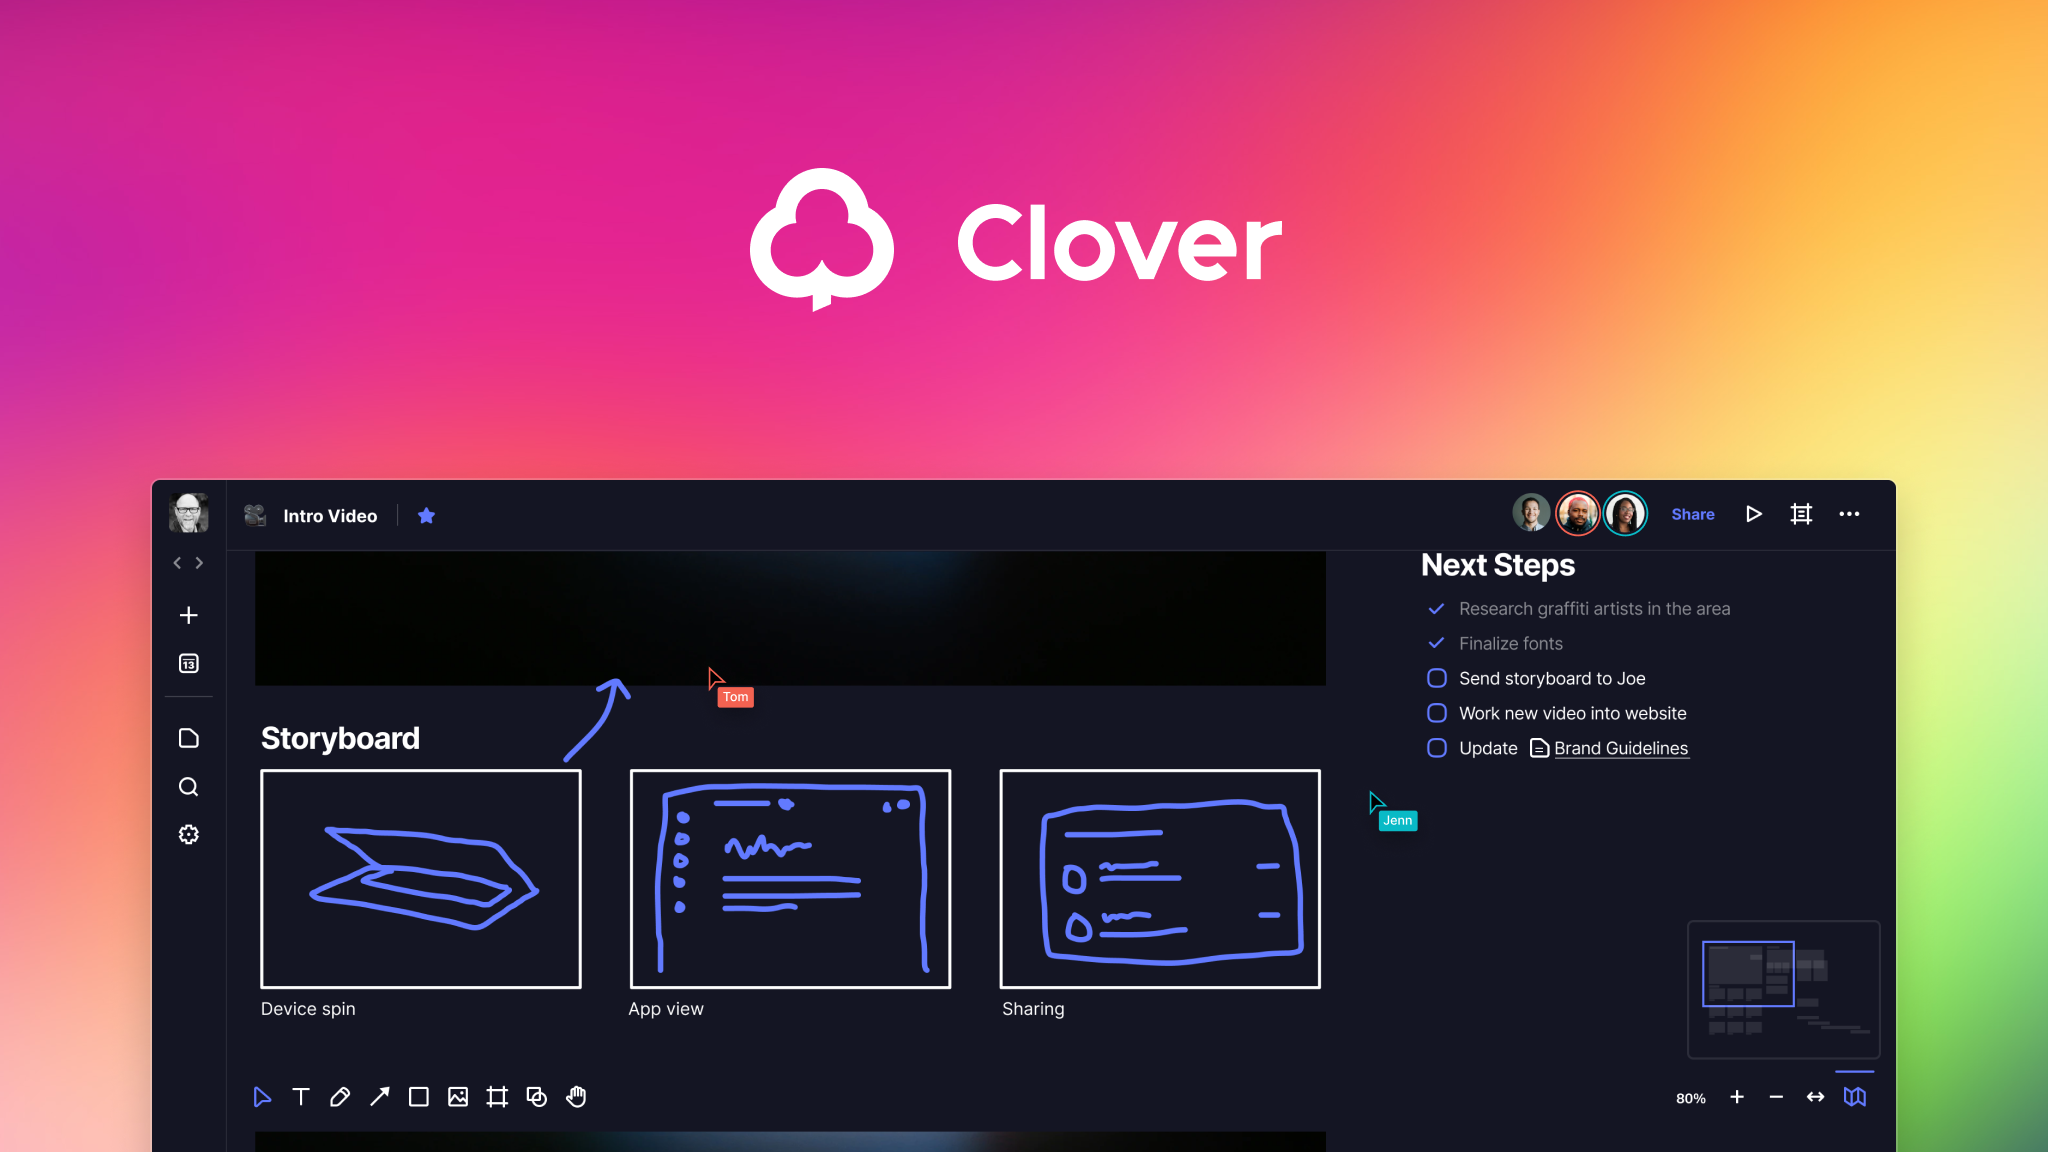 Clover made their product multiplayer in less than a day using Liveblocks